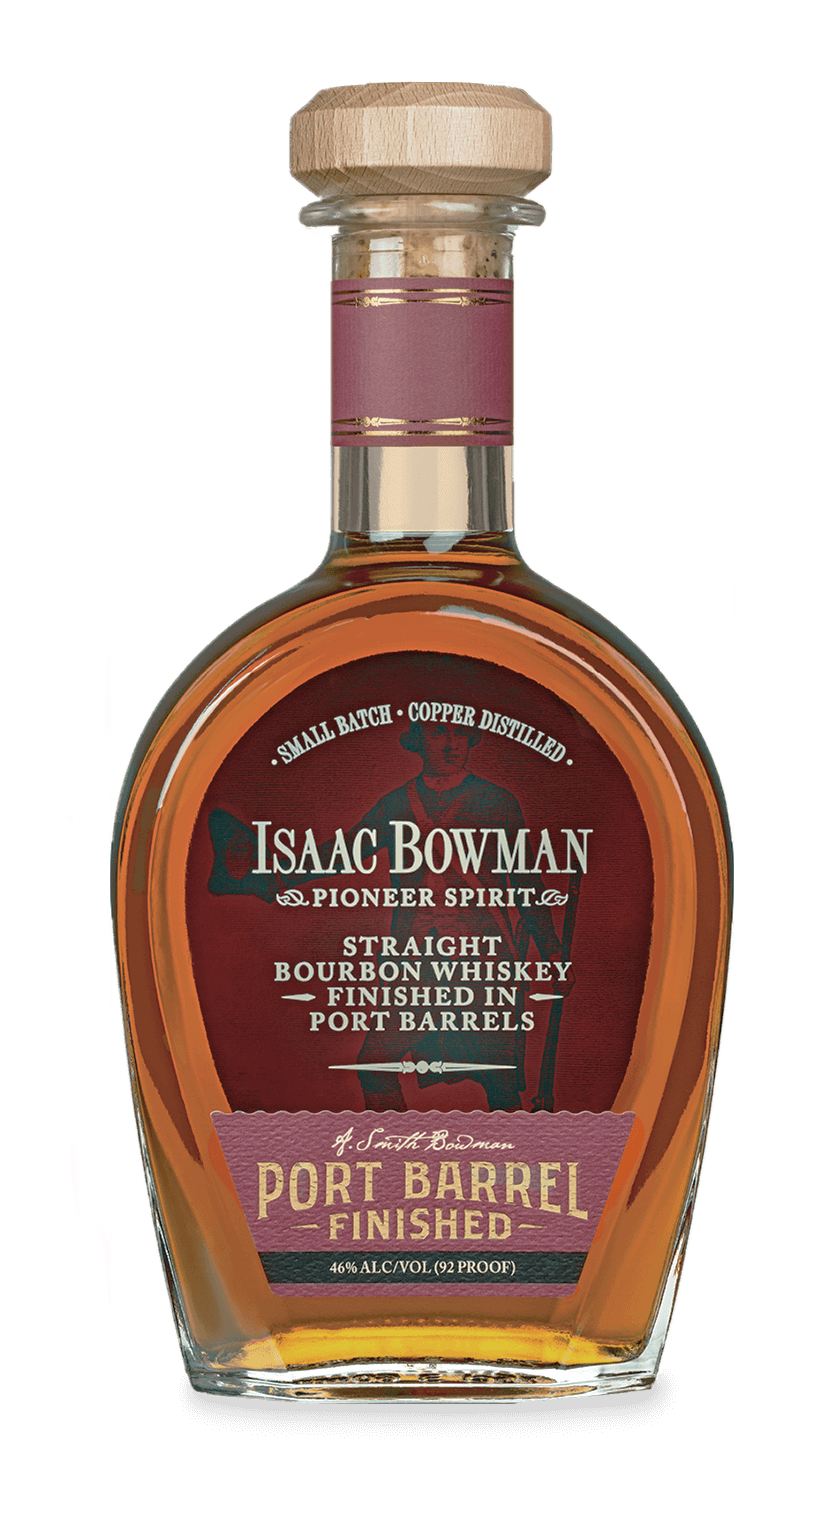 Buy Isaac Bowman Port Barrel Finished Bourbon Whiskey Online -Craft City